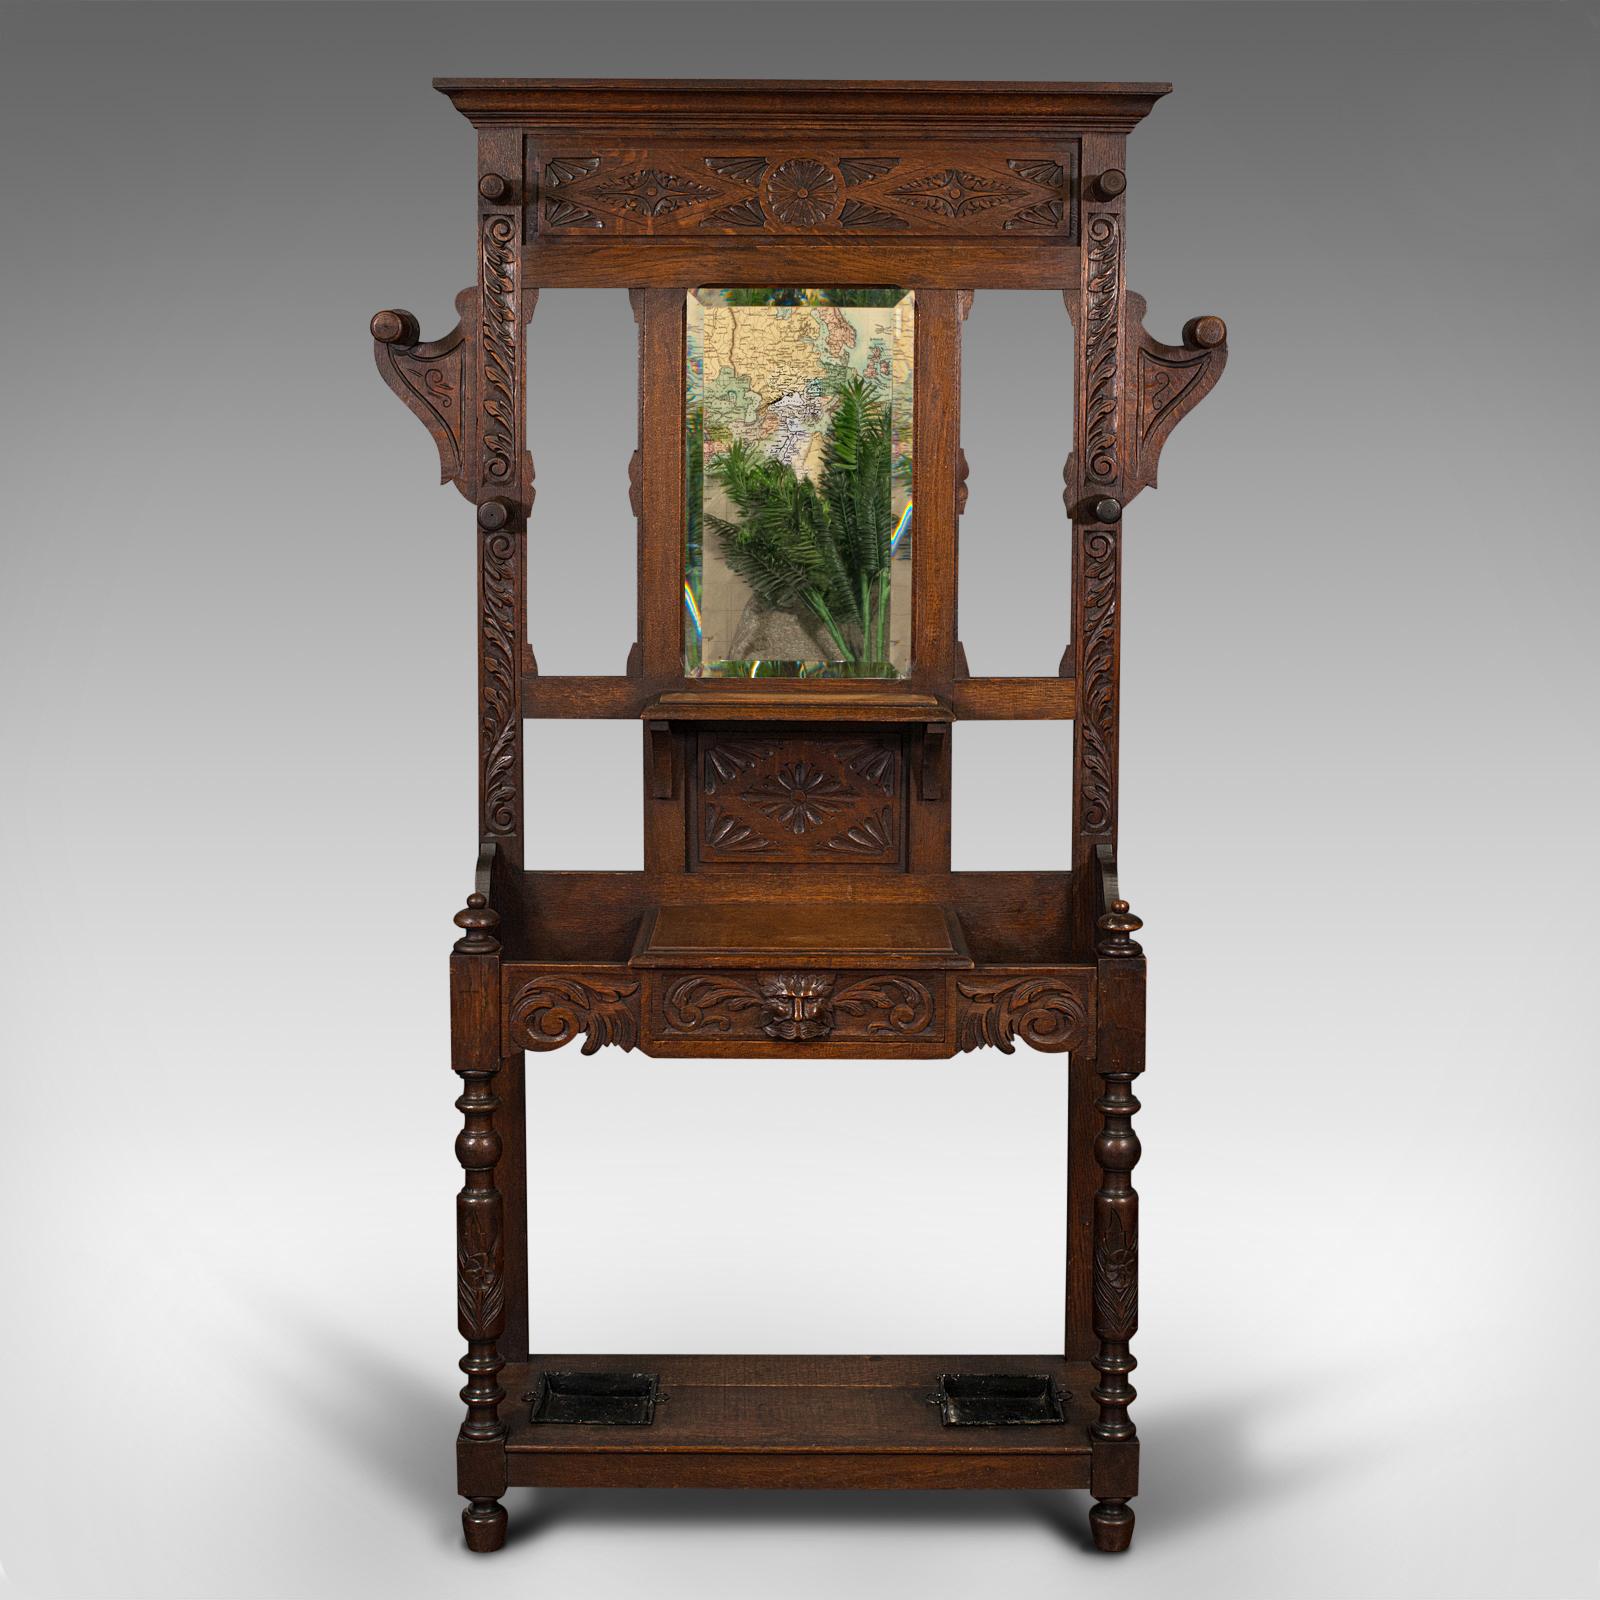 This is a tall antique hall stand. An English, carved oak stick and coat rack in Gothic revival taste, dating to the Victorian period, circa 1880.

Distinctive Gothic revival carvings decorate this striking stand
Displays a desirable aged patina